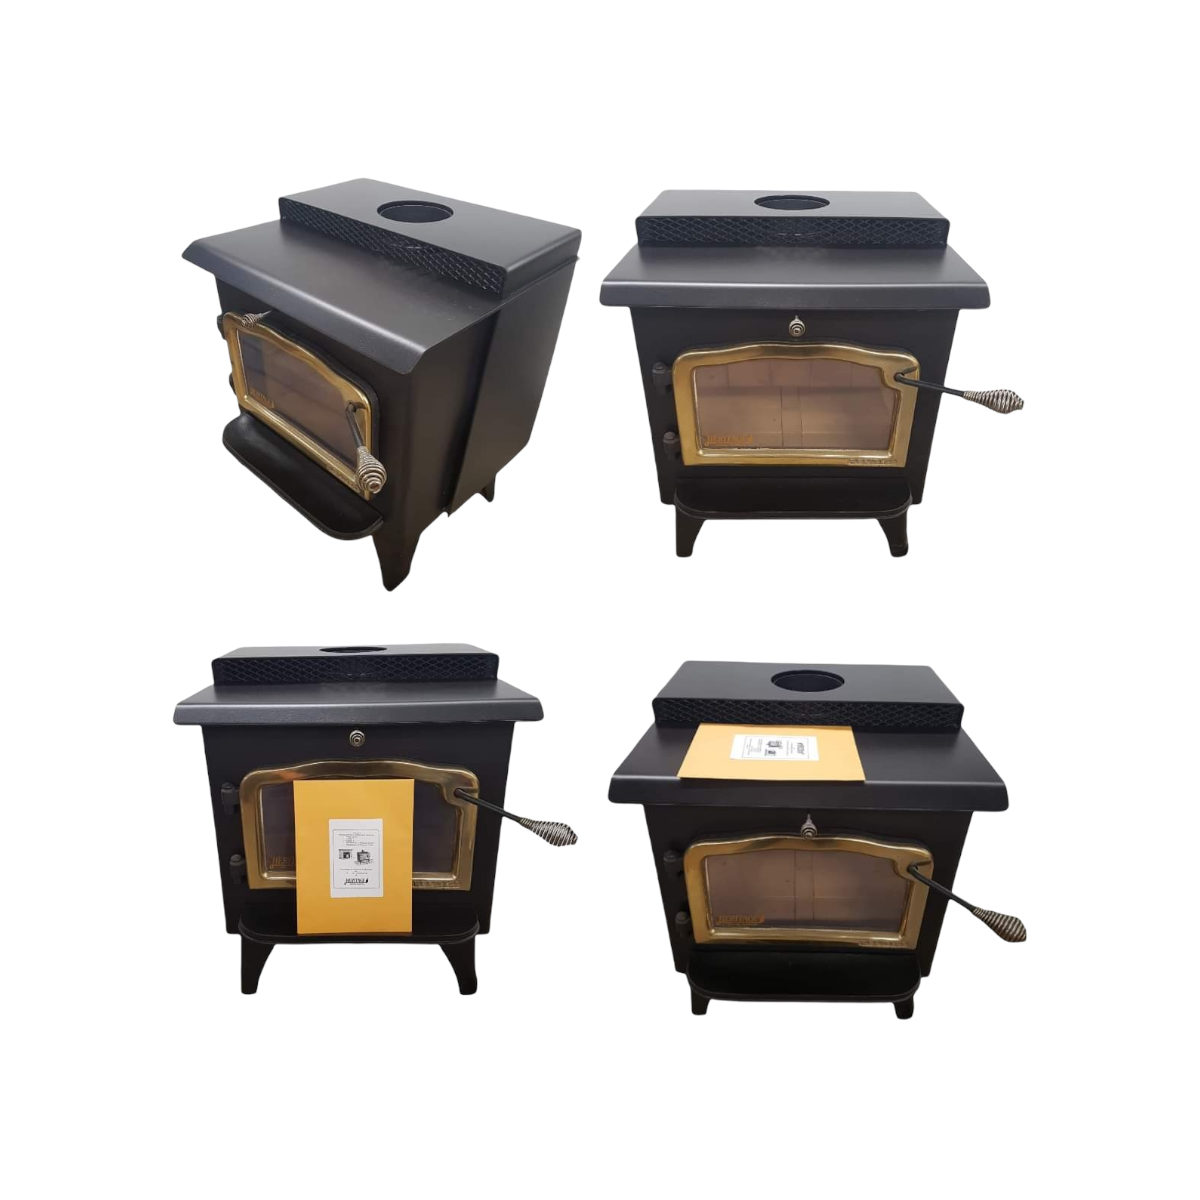 large heritage air tight wood stove